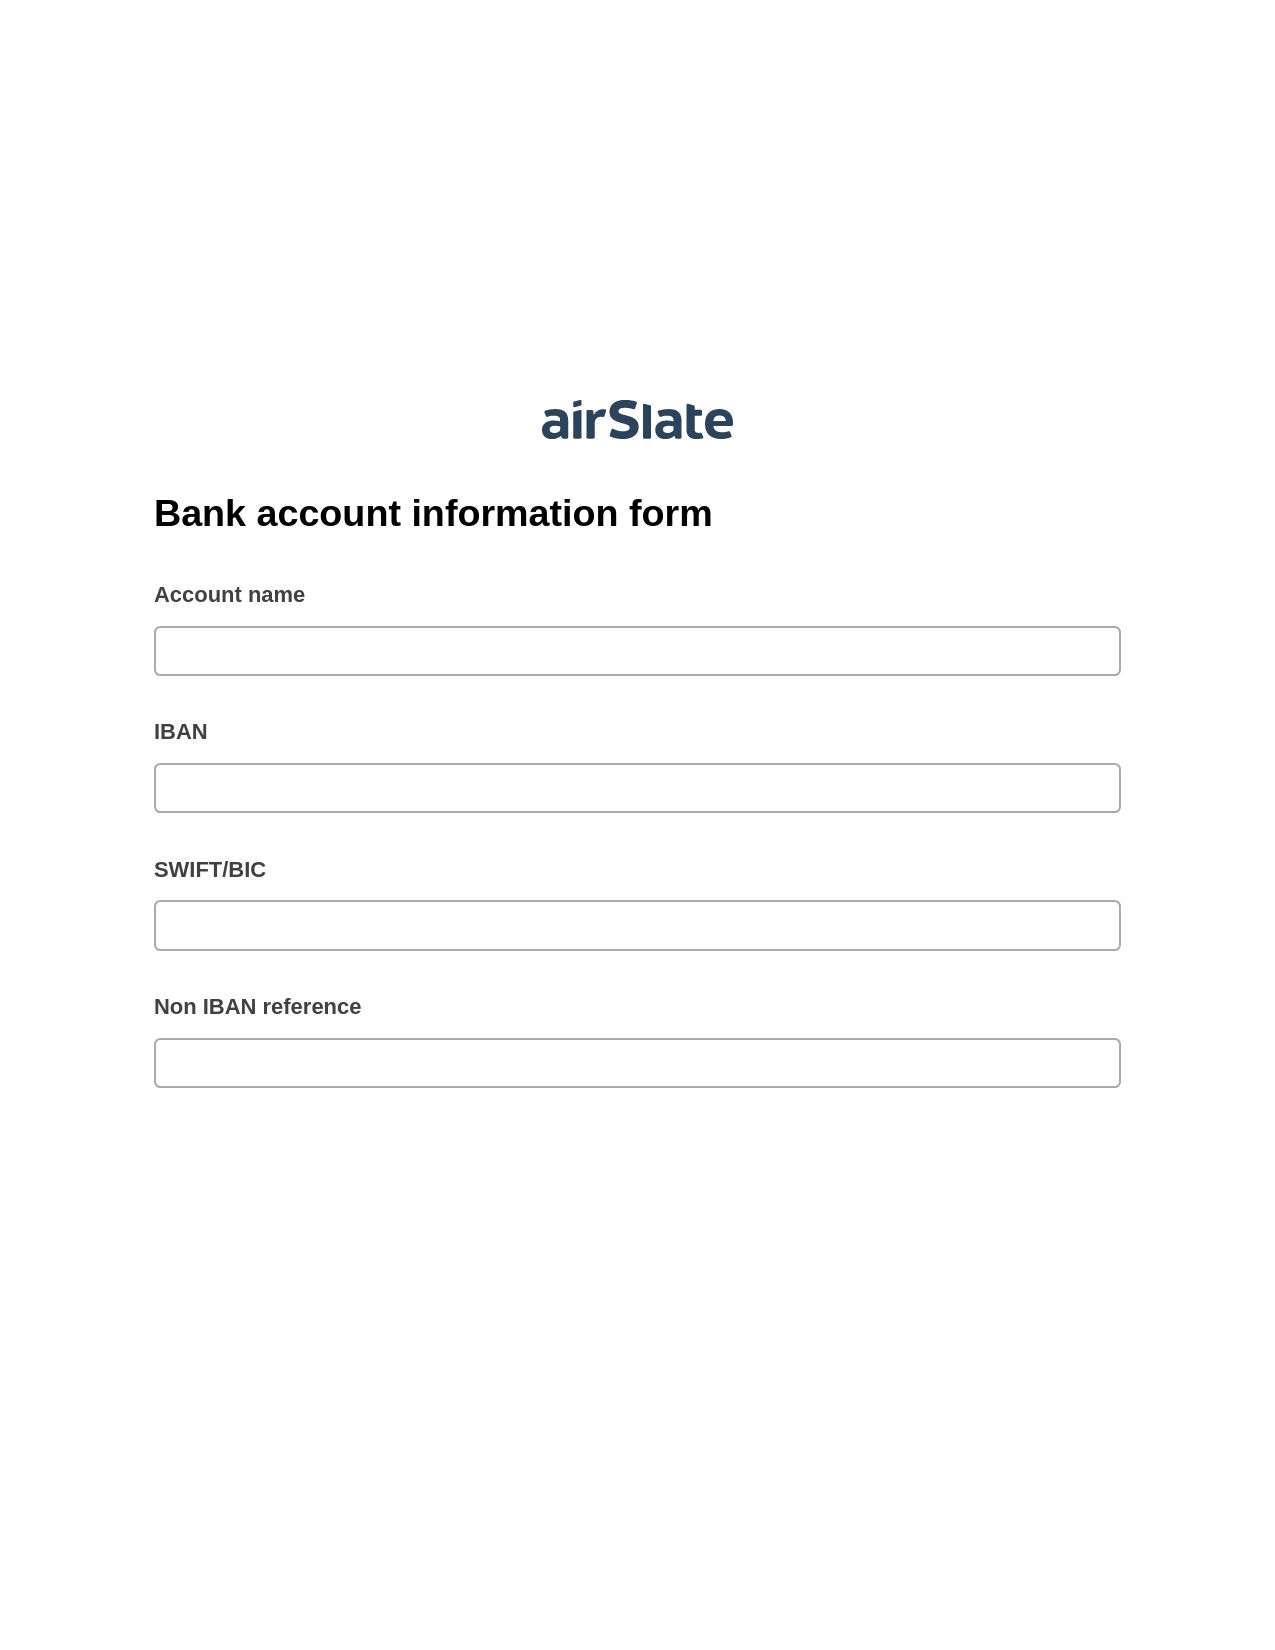 Multirole Bank account information form Pre-fill from MySQL Dropdown Options Bot, Unassign Role Bot, Export to Salesforce Bot